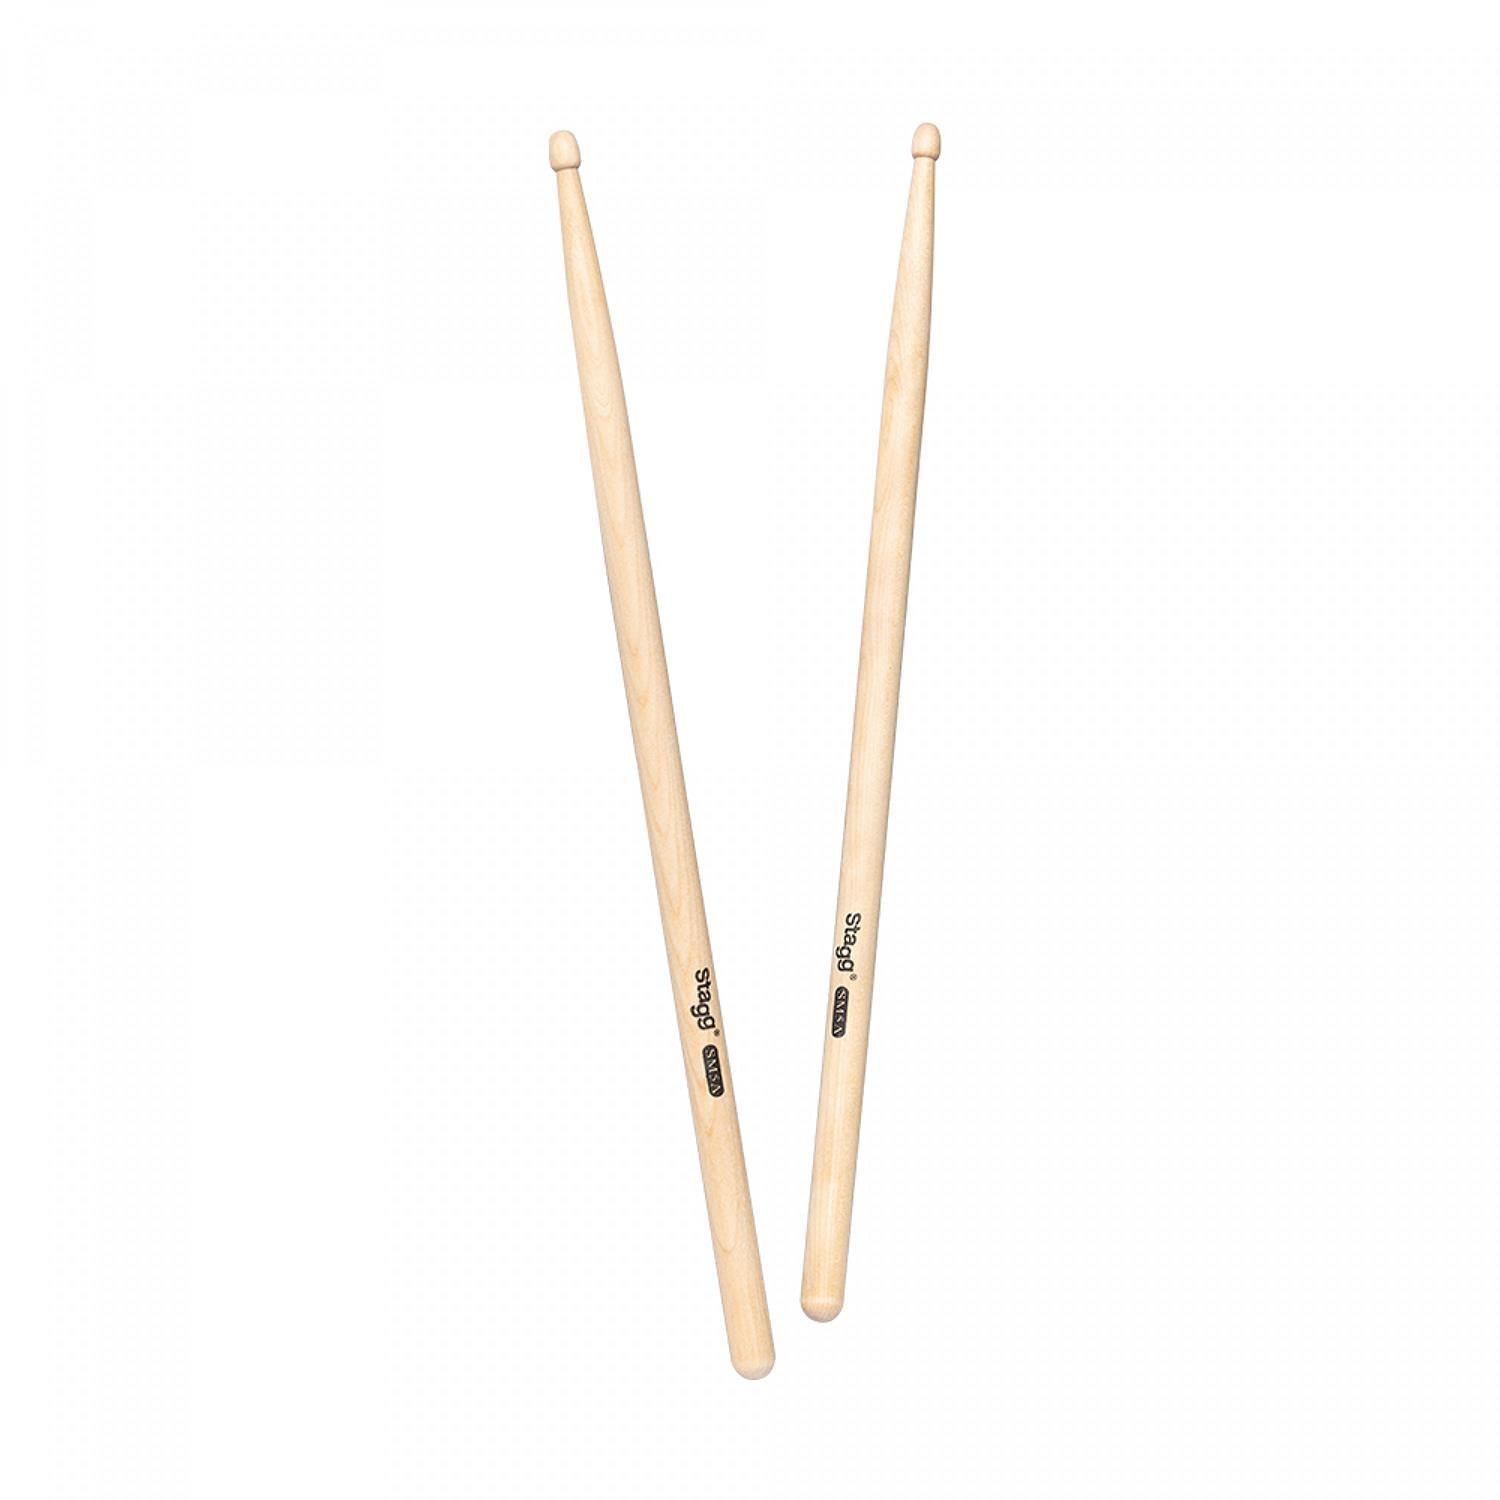 3 x Stagg SM5A Maple Drum Sticks with Wooden Tip - DY Pro Audio